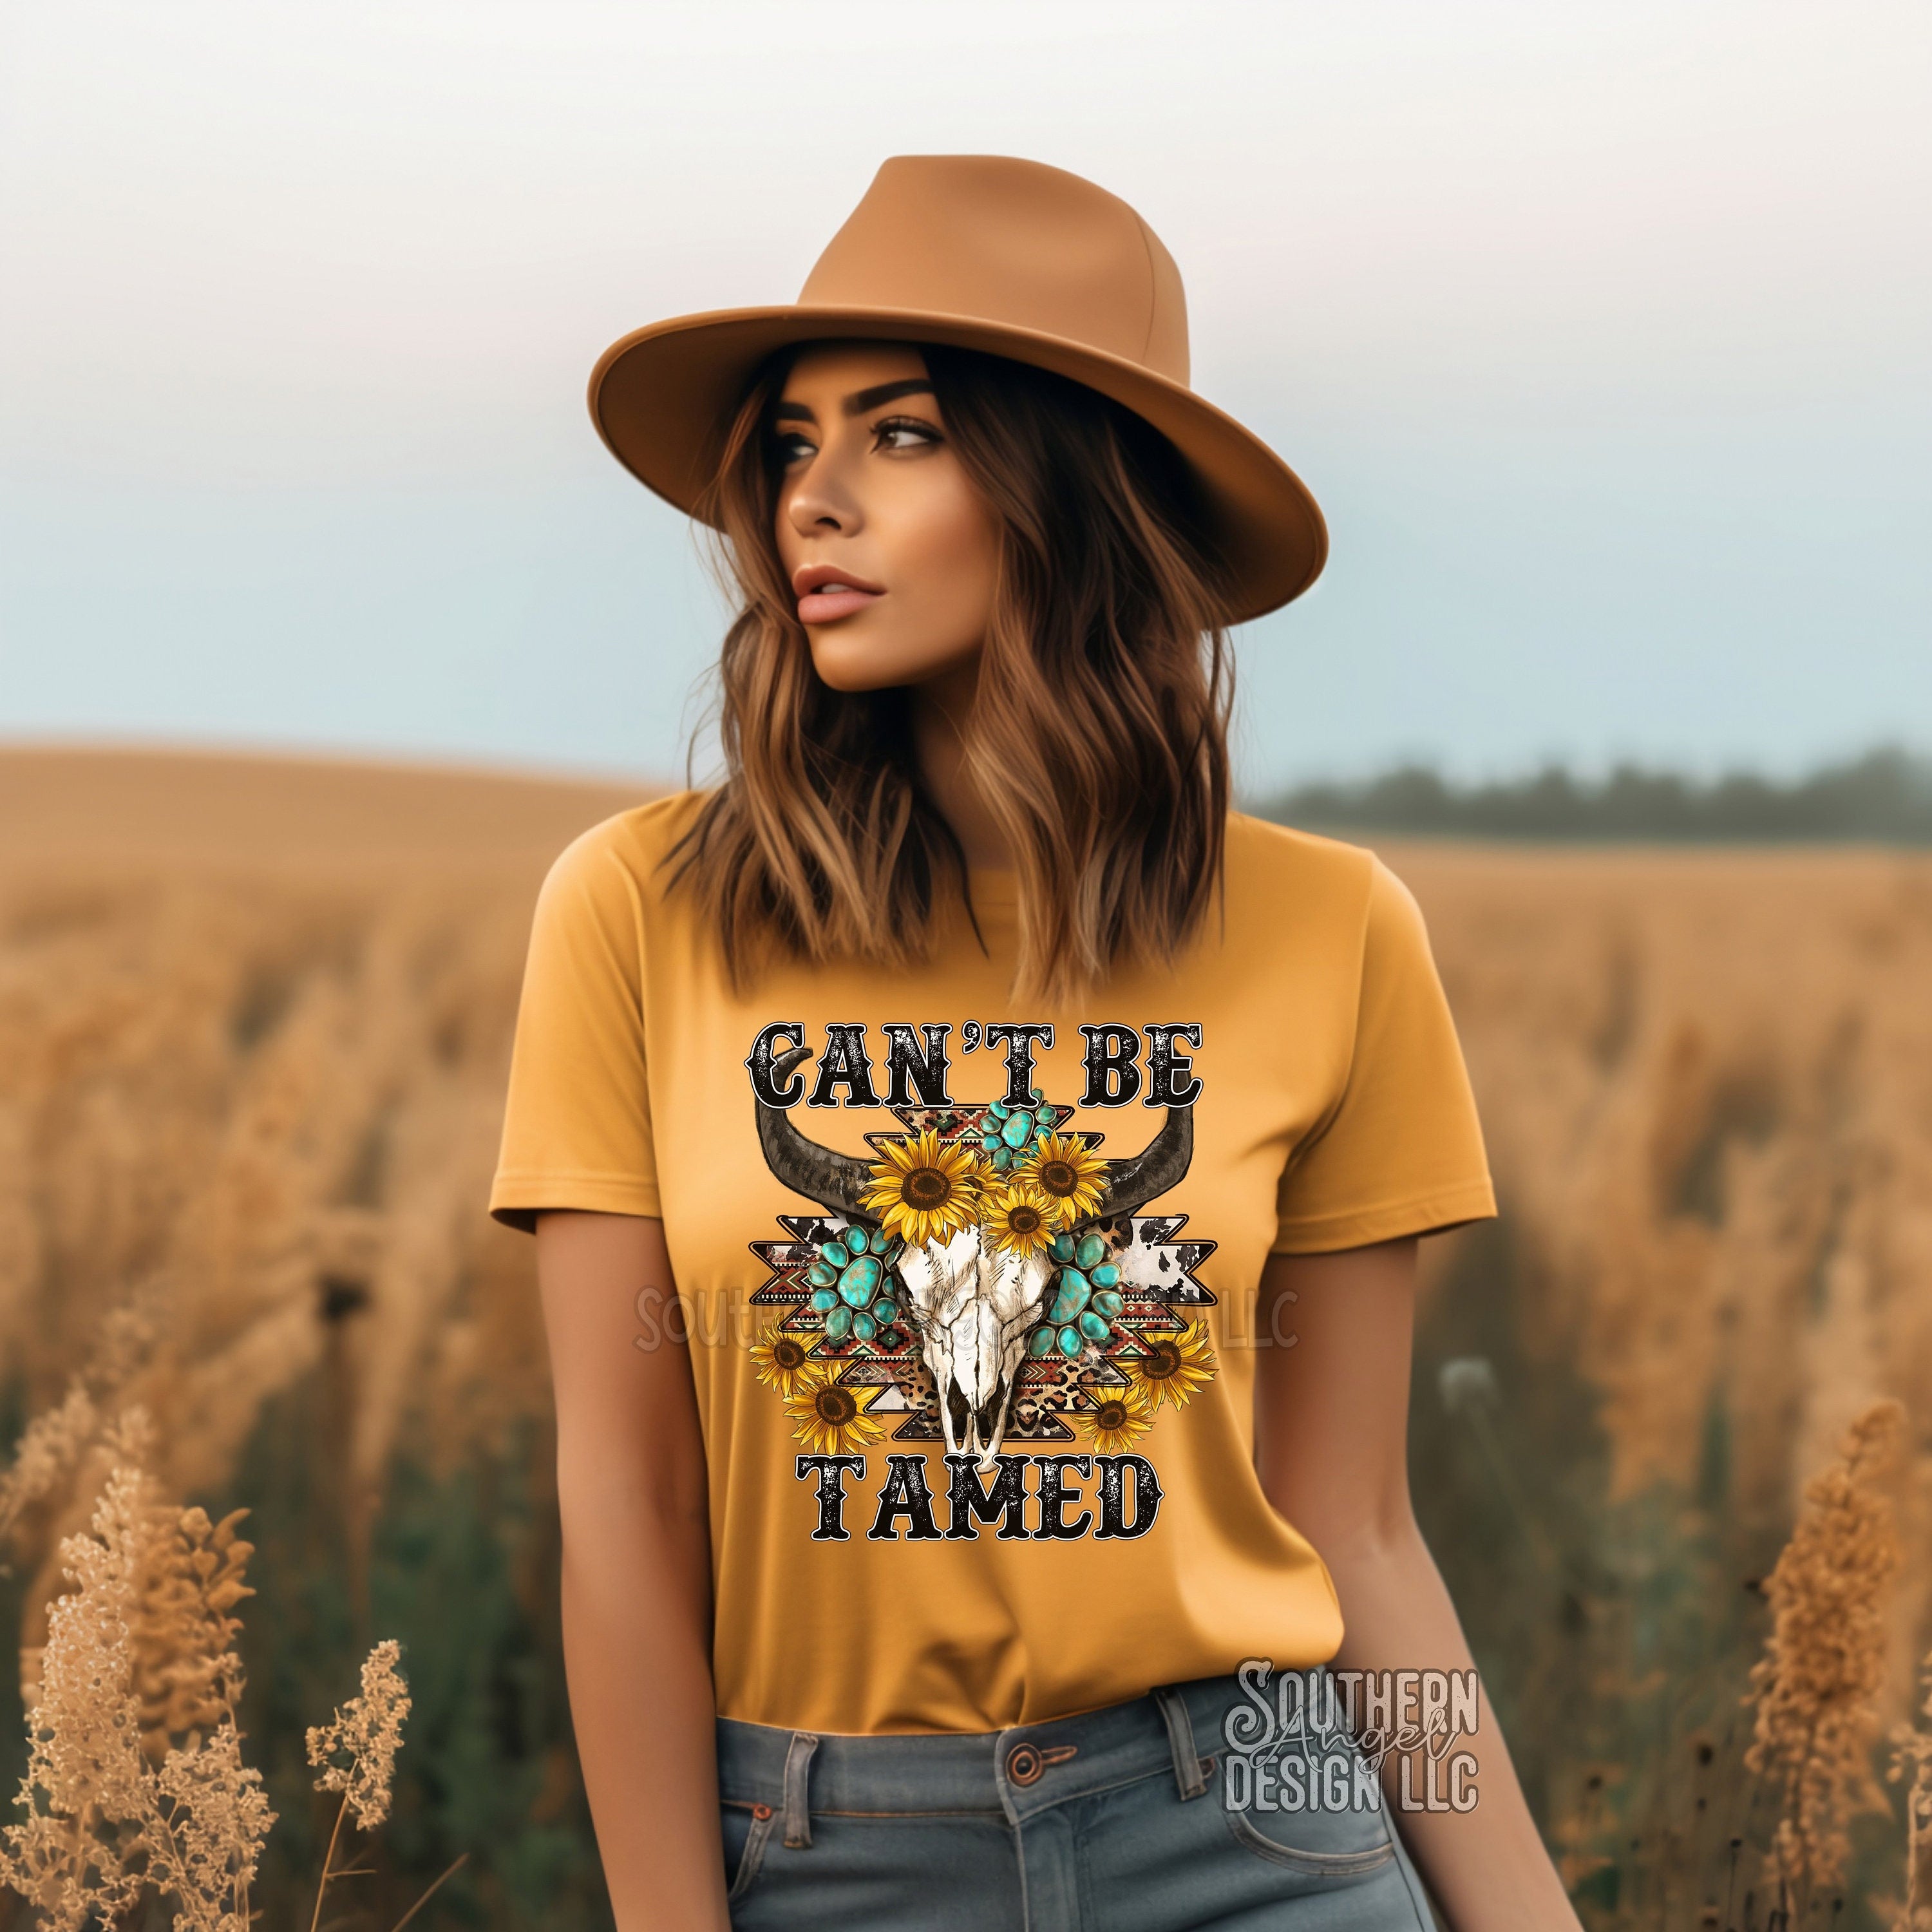 Country music shirt, Rustic shirt, Southern girl shirt, Can’t be tamed, Music festival shirt, Country graphic tee, Rodeo shirt, Texas girl